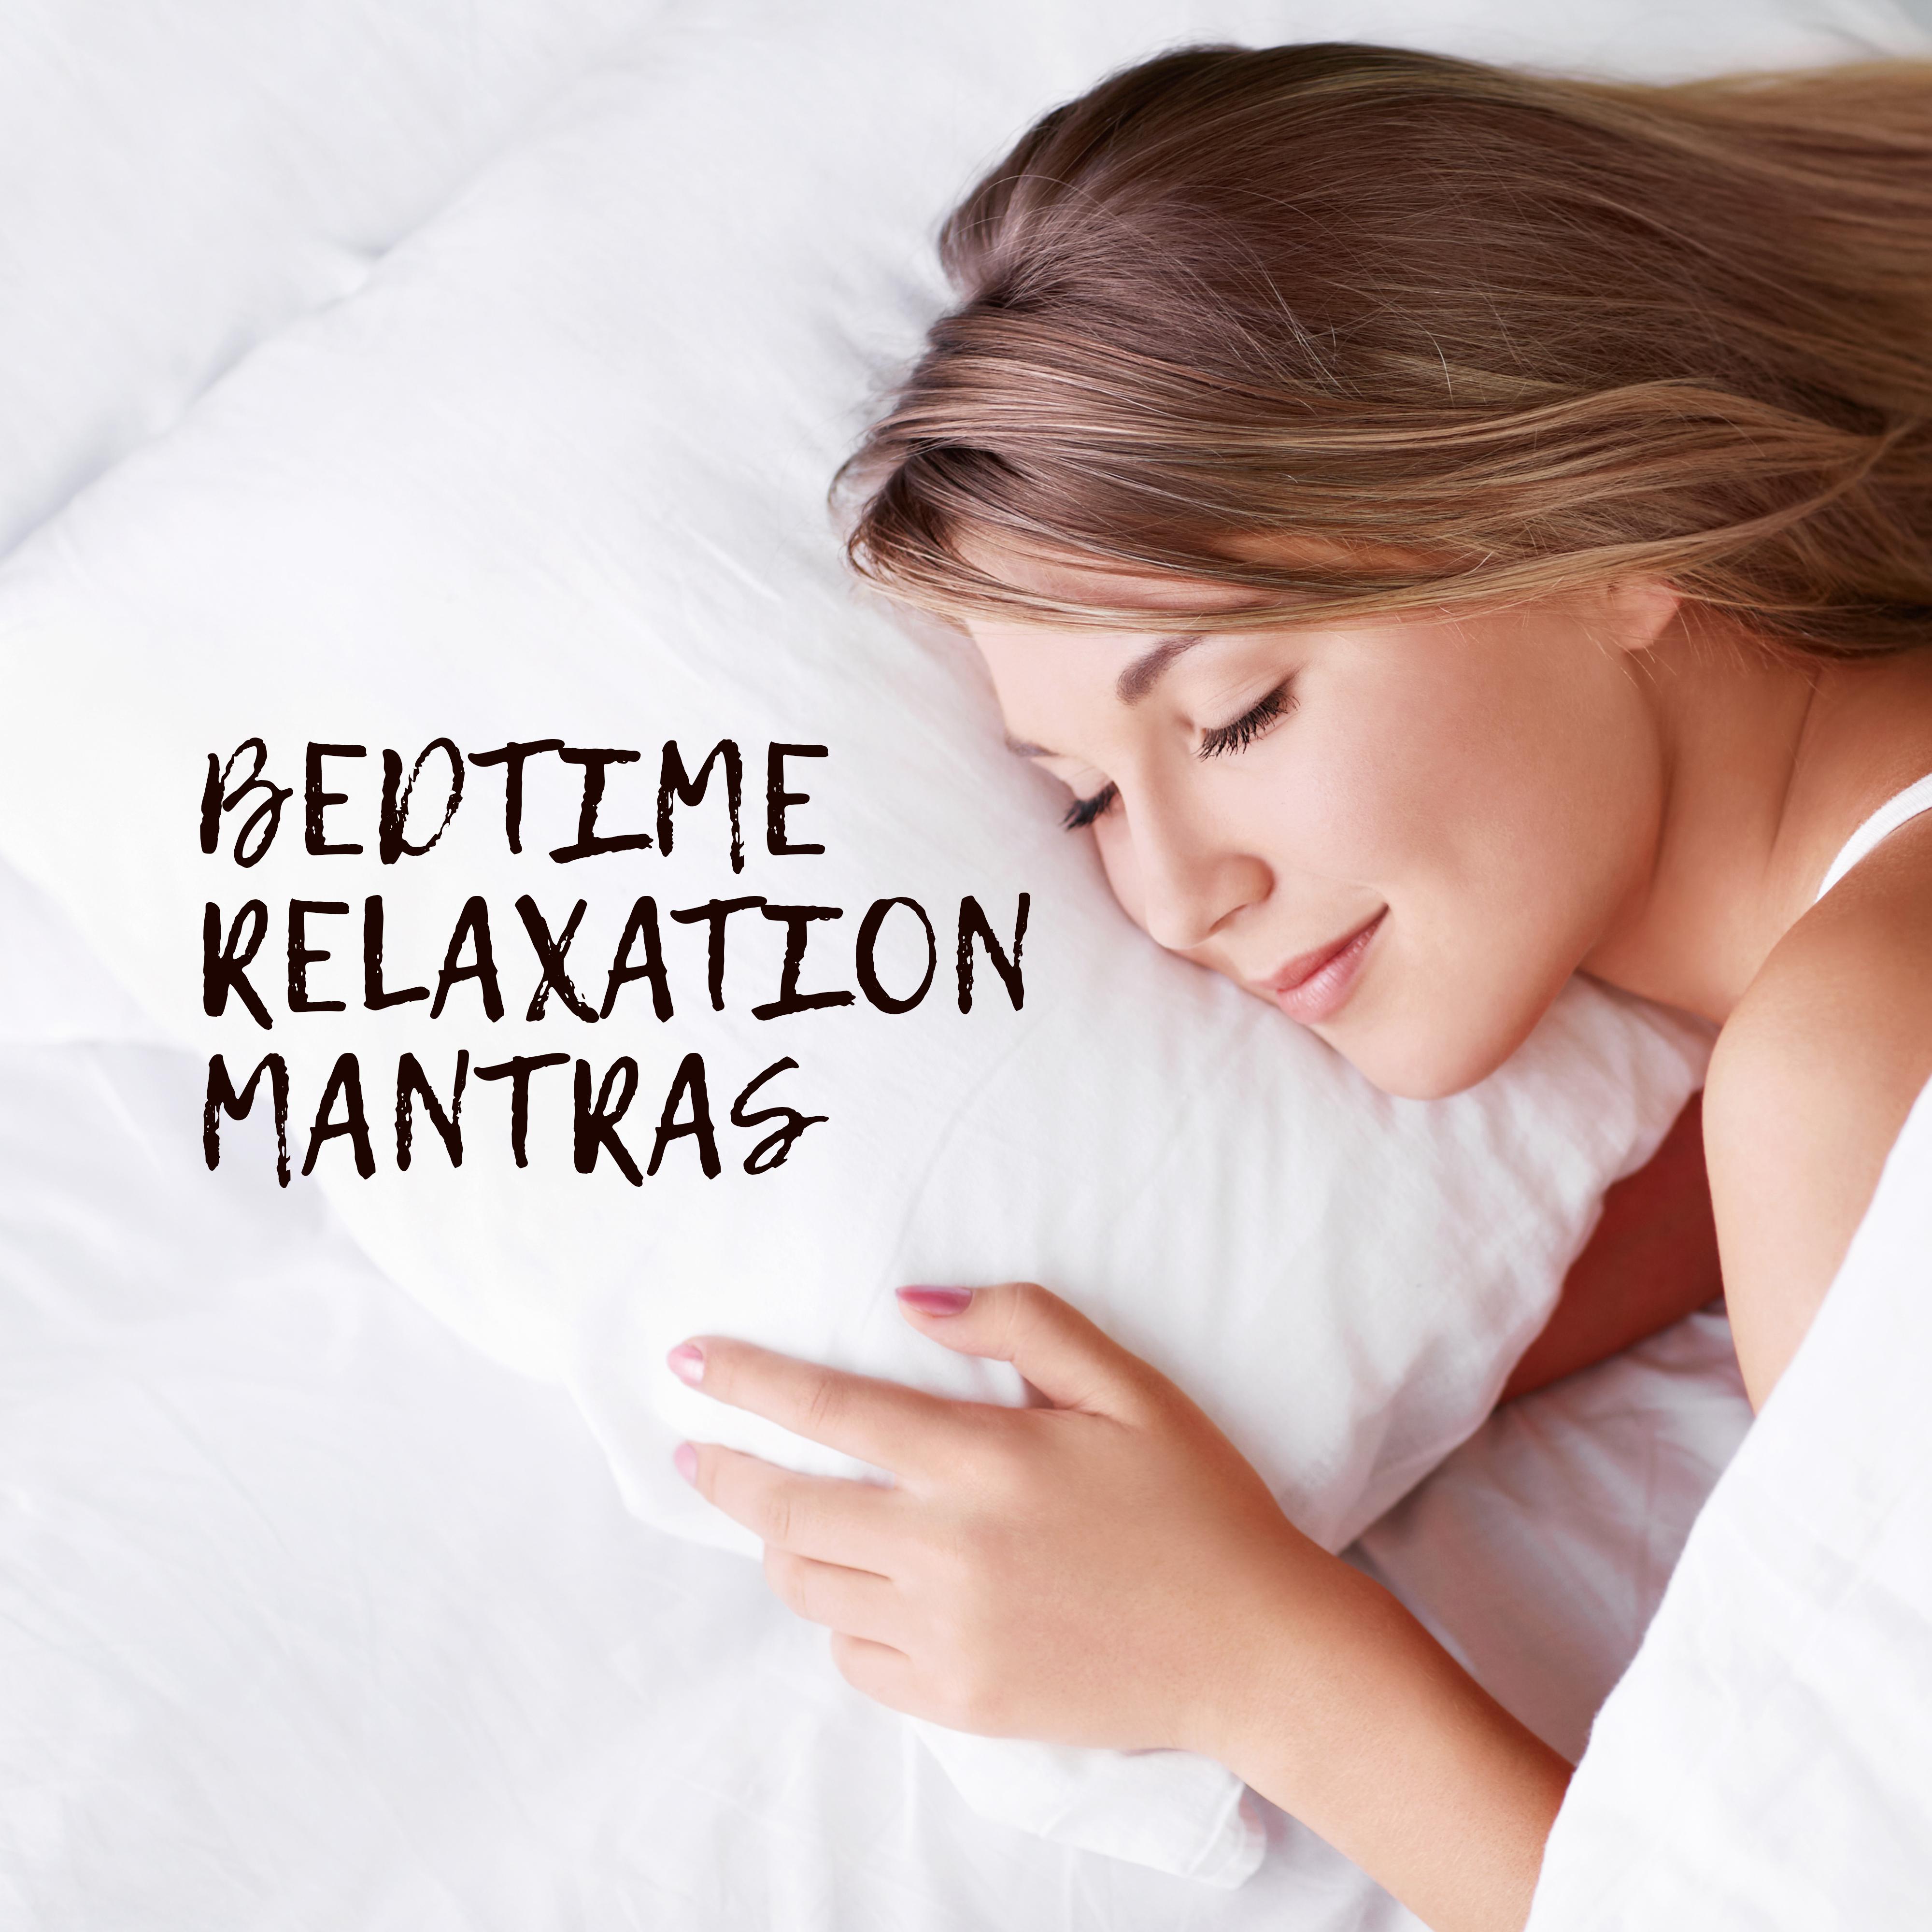 Bedtime Relaxation Mantras: 2019 New Age Ambient Mix for Good Sleep, Cure Insomnia, Relief Stress, Destroy Bad Thoughts, Afternoon Nap